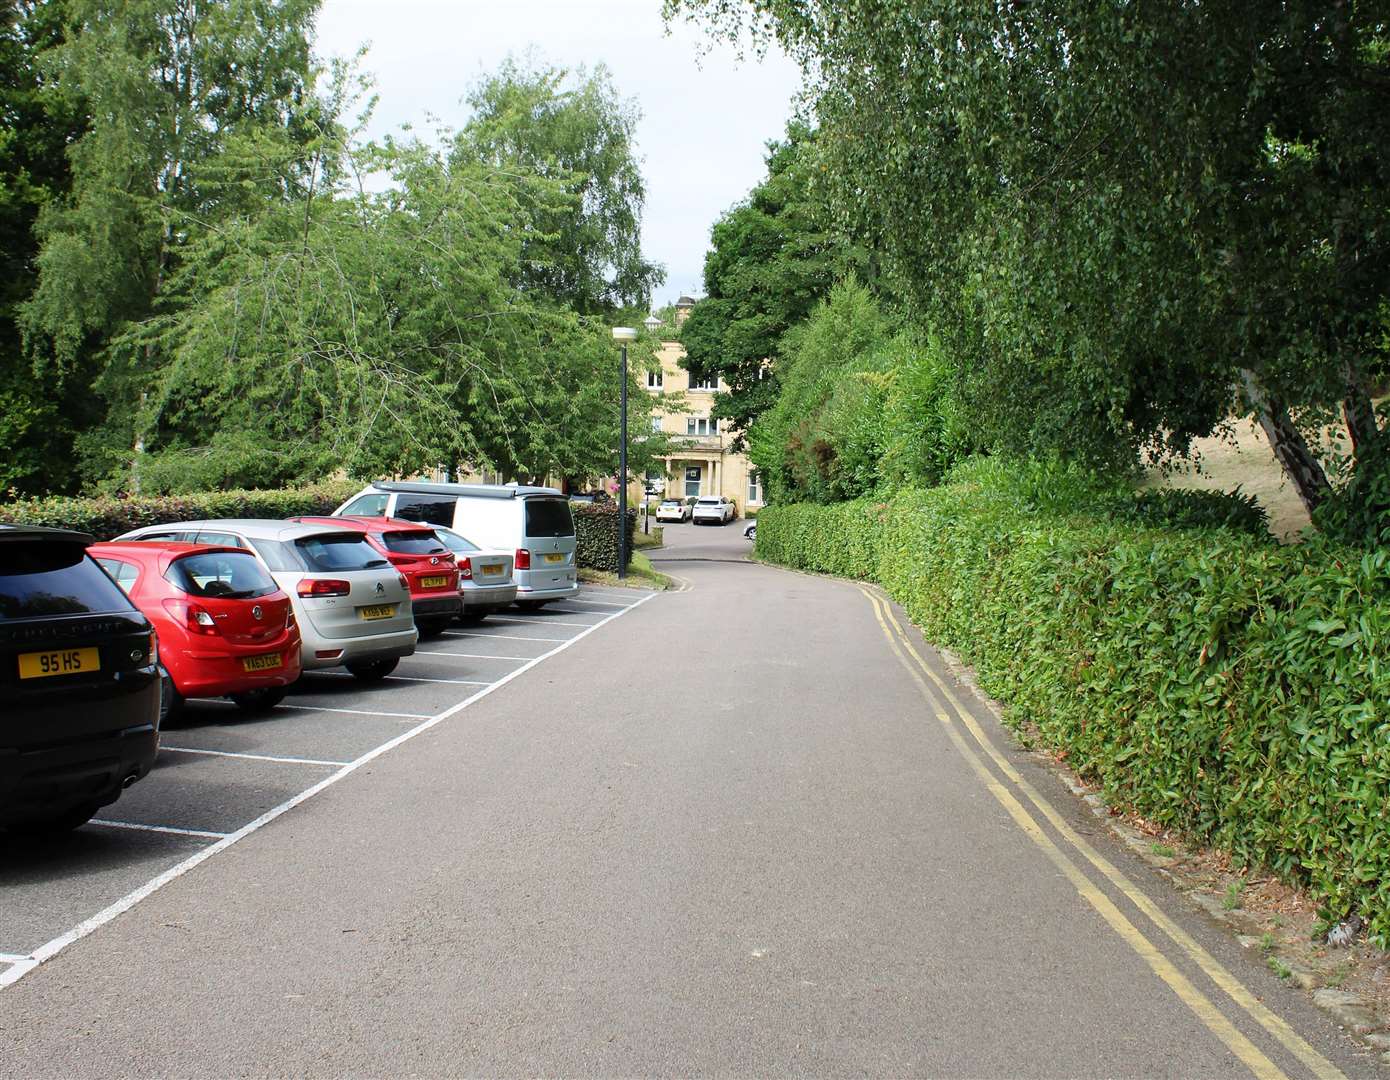 Parking at Salomons House will re-sited. Pic Emily Harding Photography